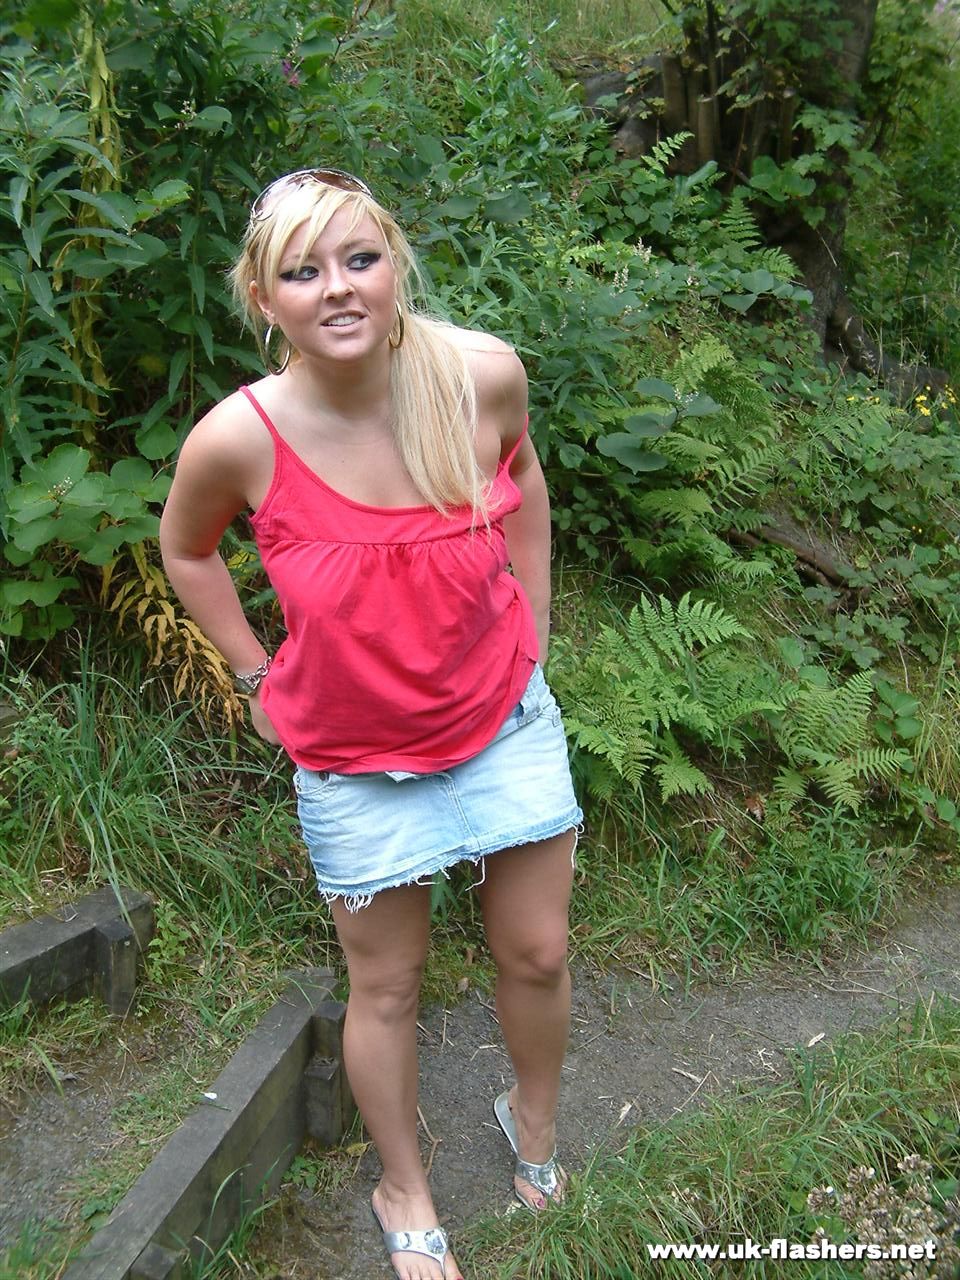 Overweight UK female with blonde hair strips naked on a popular walking trails foto porno #428197328